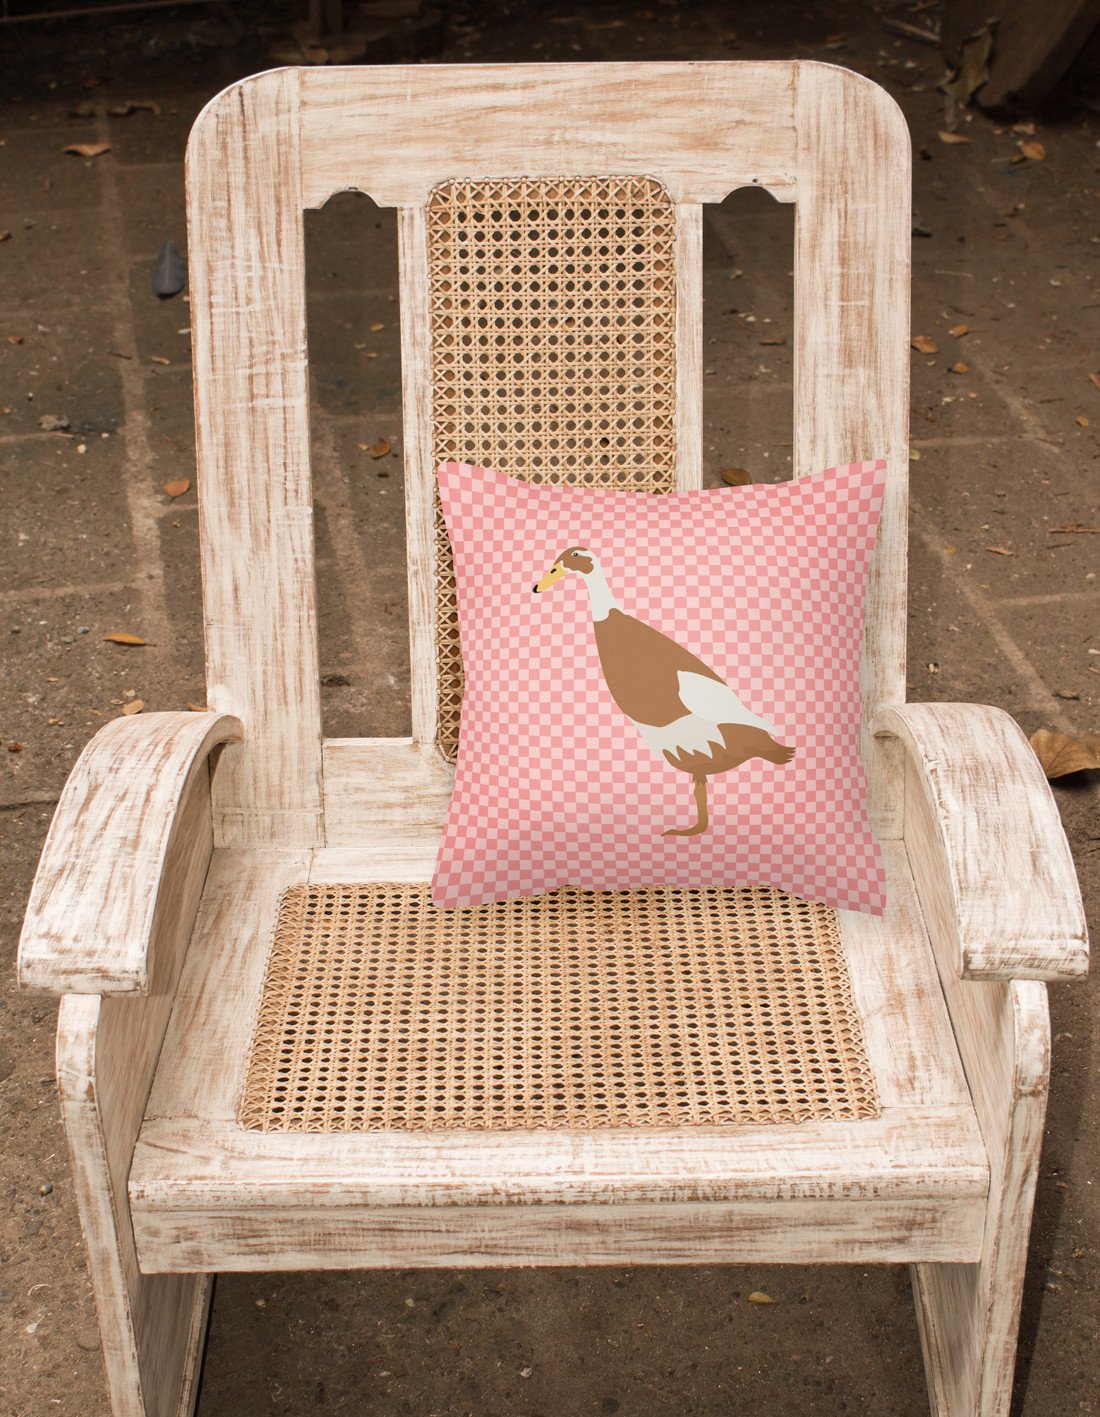 Indian Runner Duck Pink Check Fabric Decorative Pillow BB7865PW1818 by Caroline's Treasures